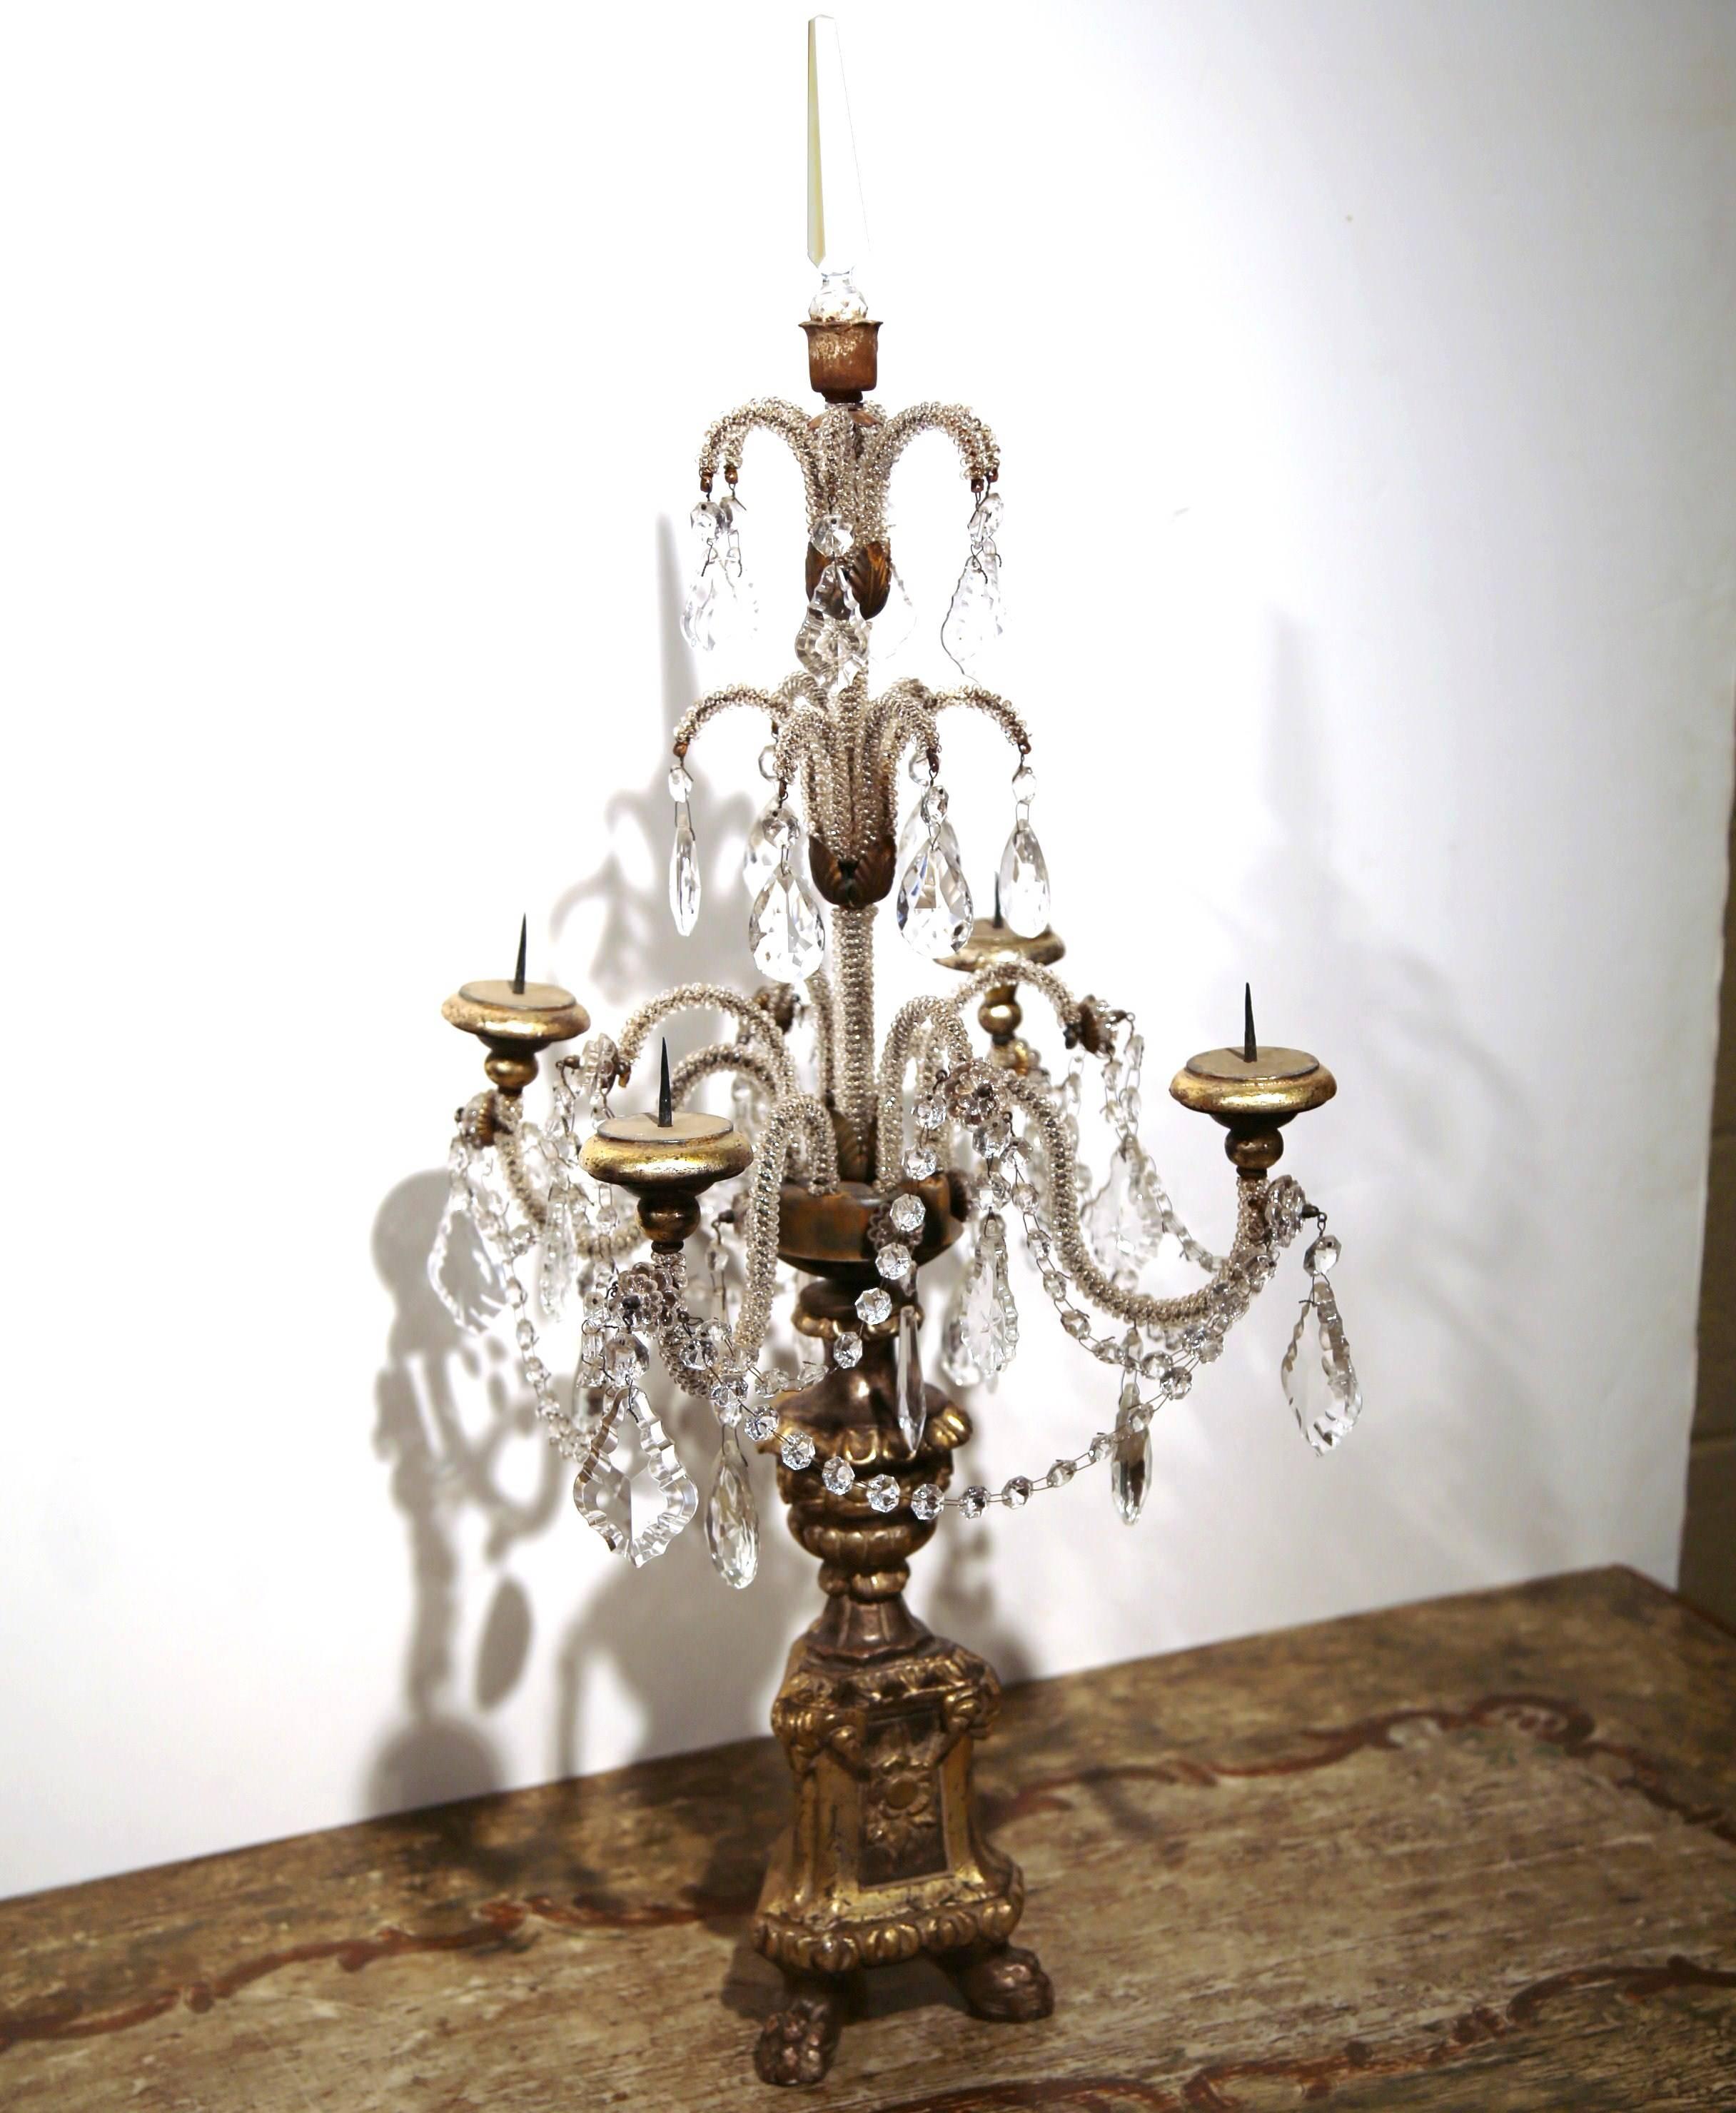 Giltwood Pair of Early 20th Century Italian Gold Leaf Candlesticks with Crystal and Glass